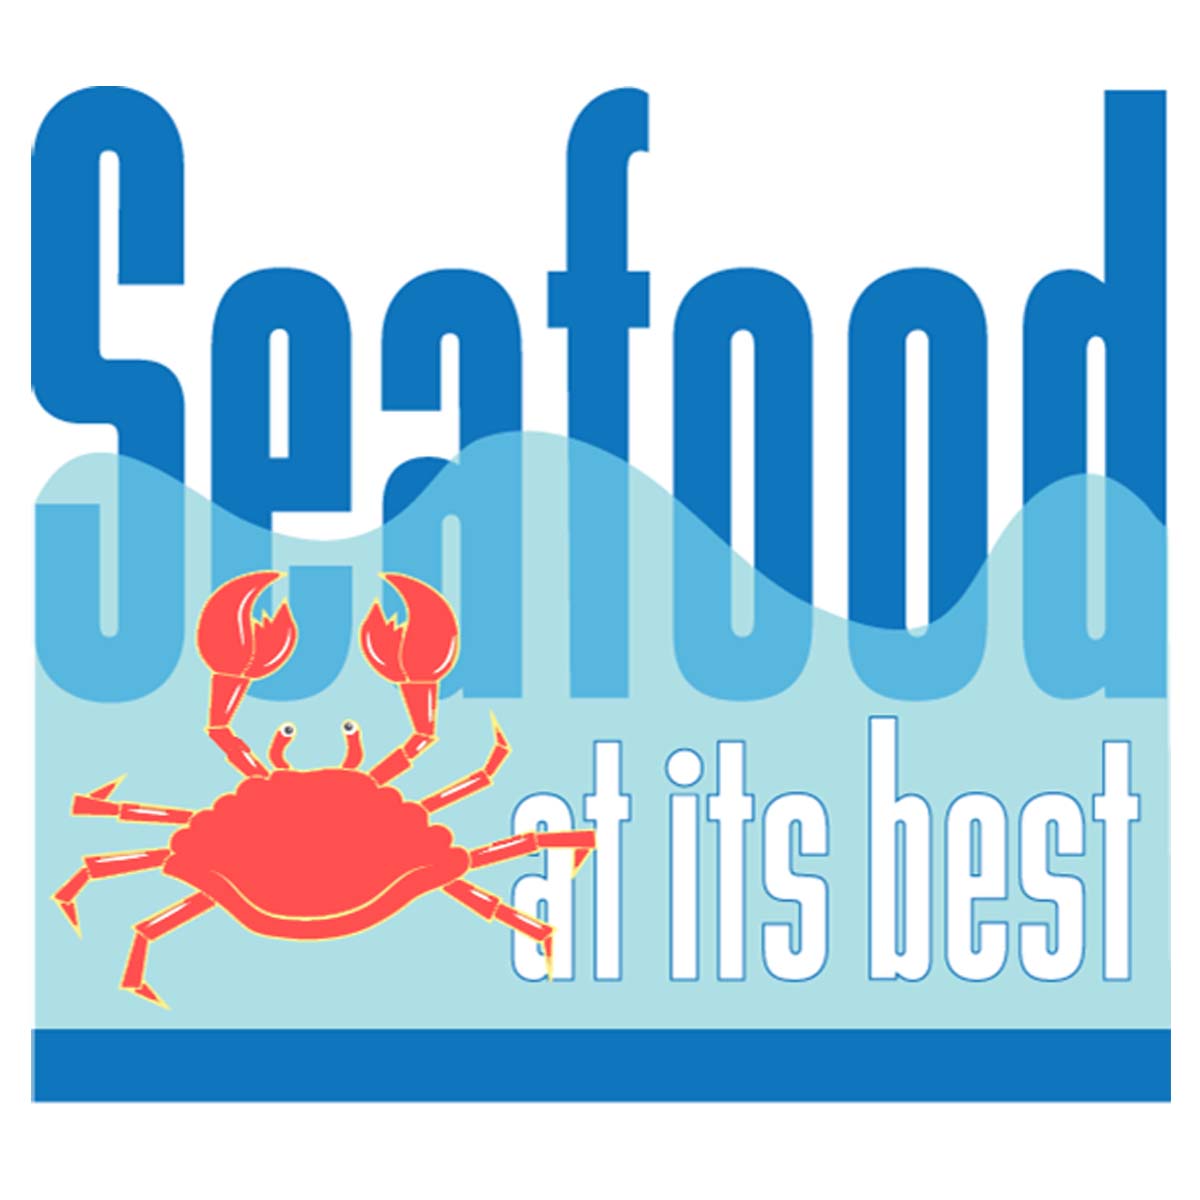 Seafood at its Best logo